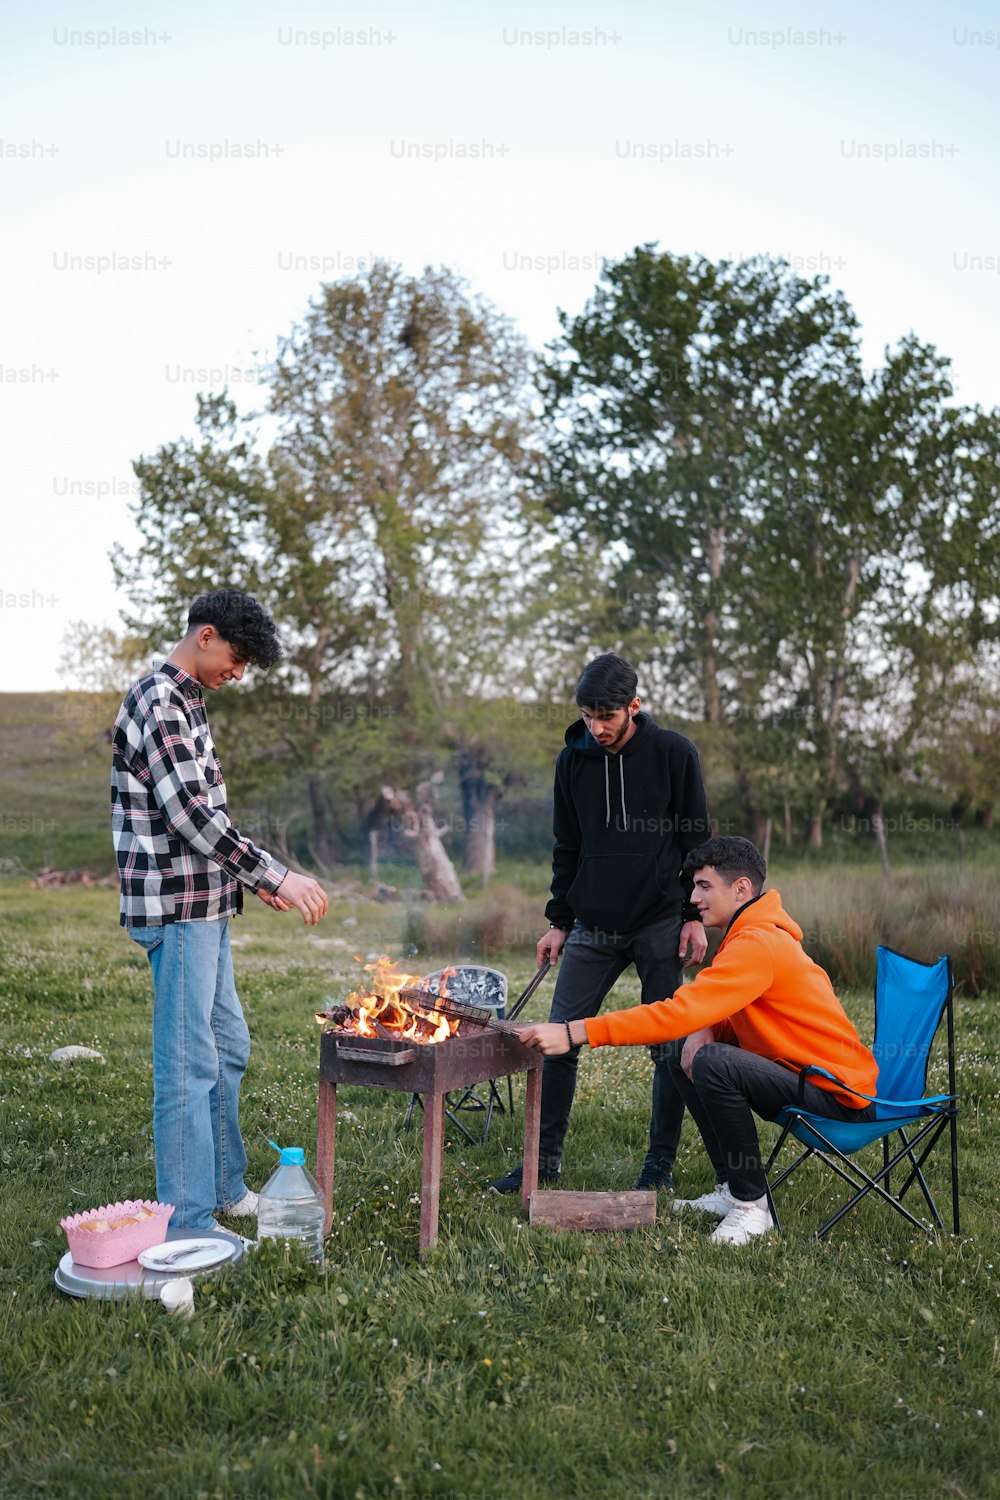 a group of men standing around a fire pit